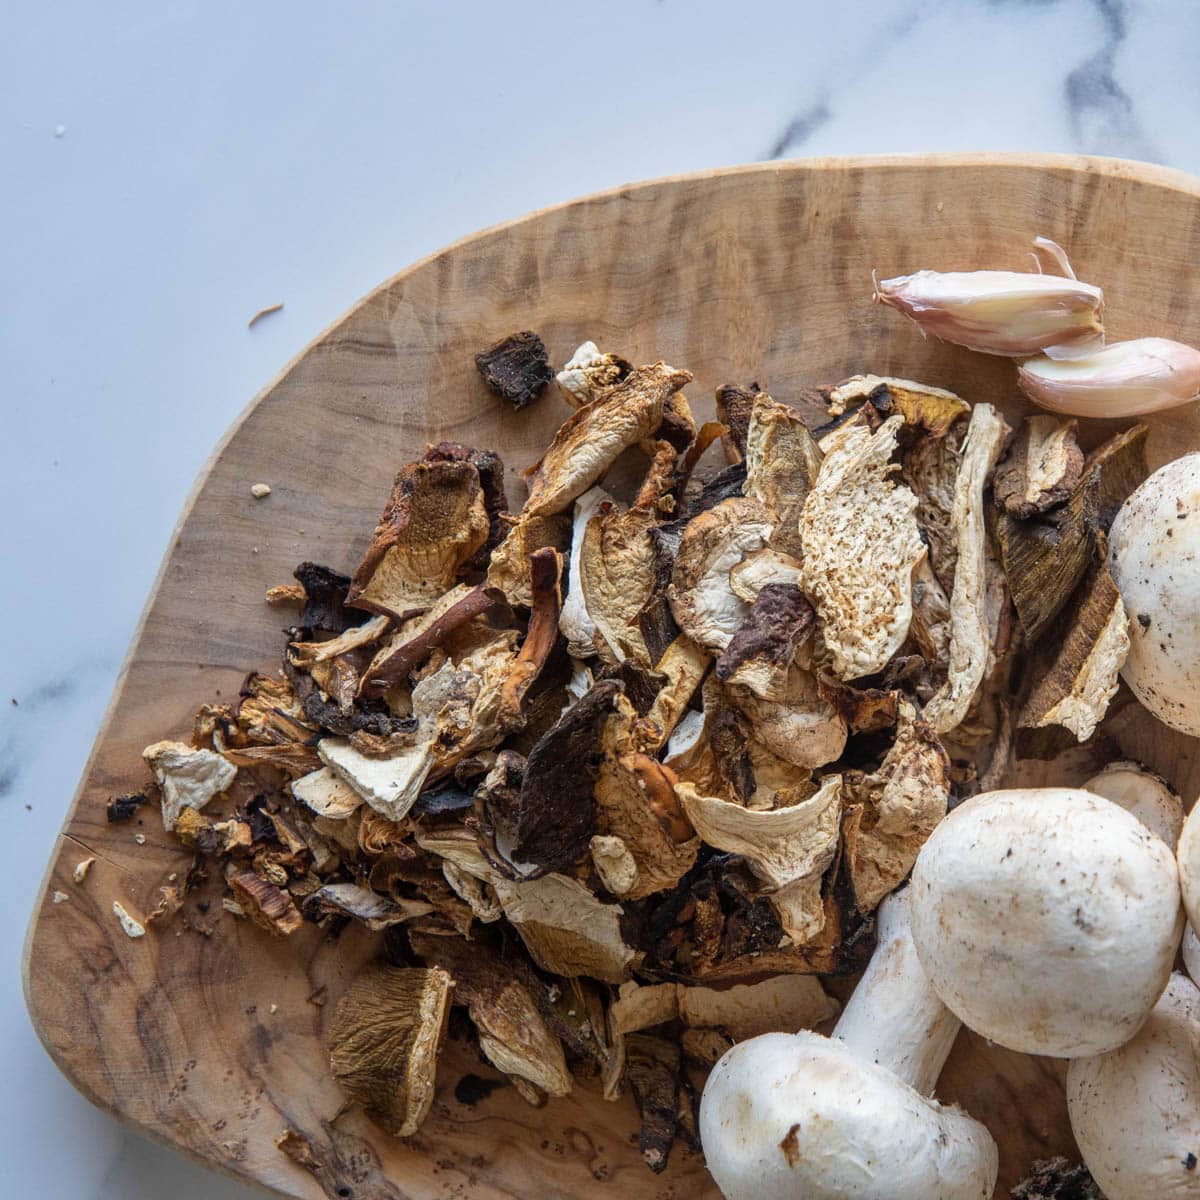 How to Dry or Dehydrate Wild Mushrooms